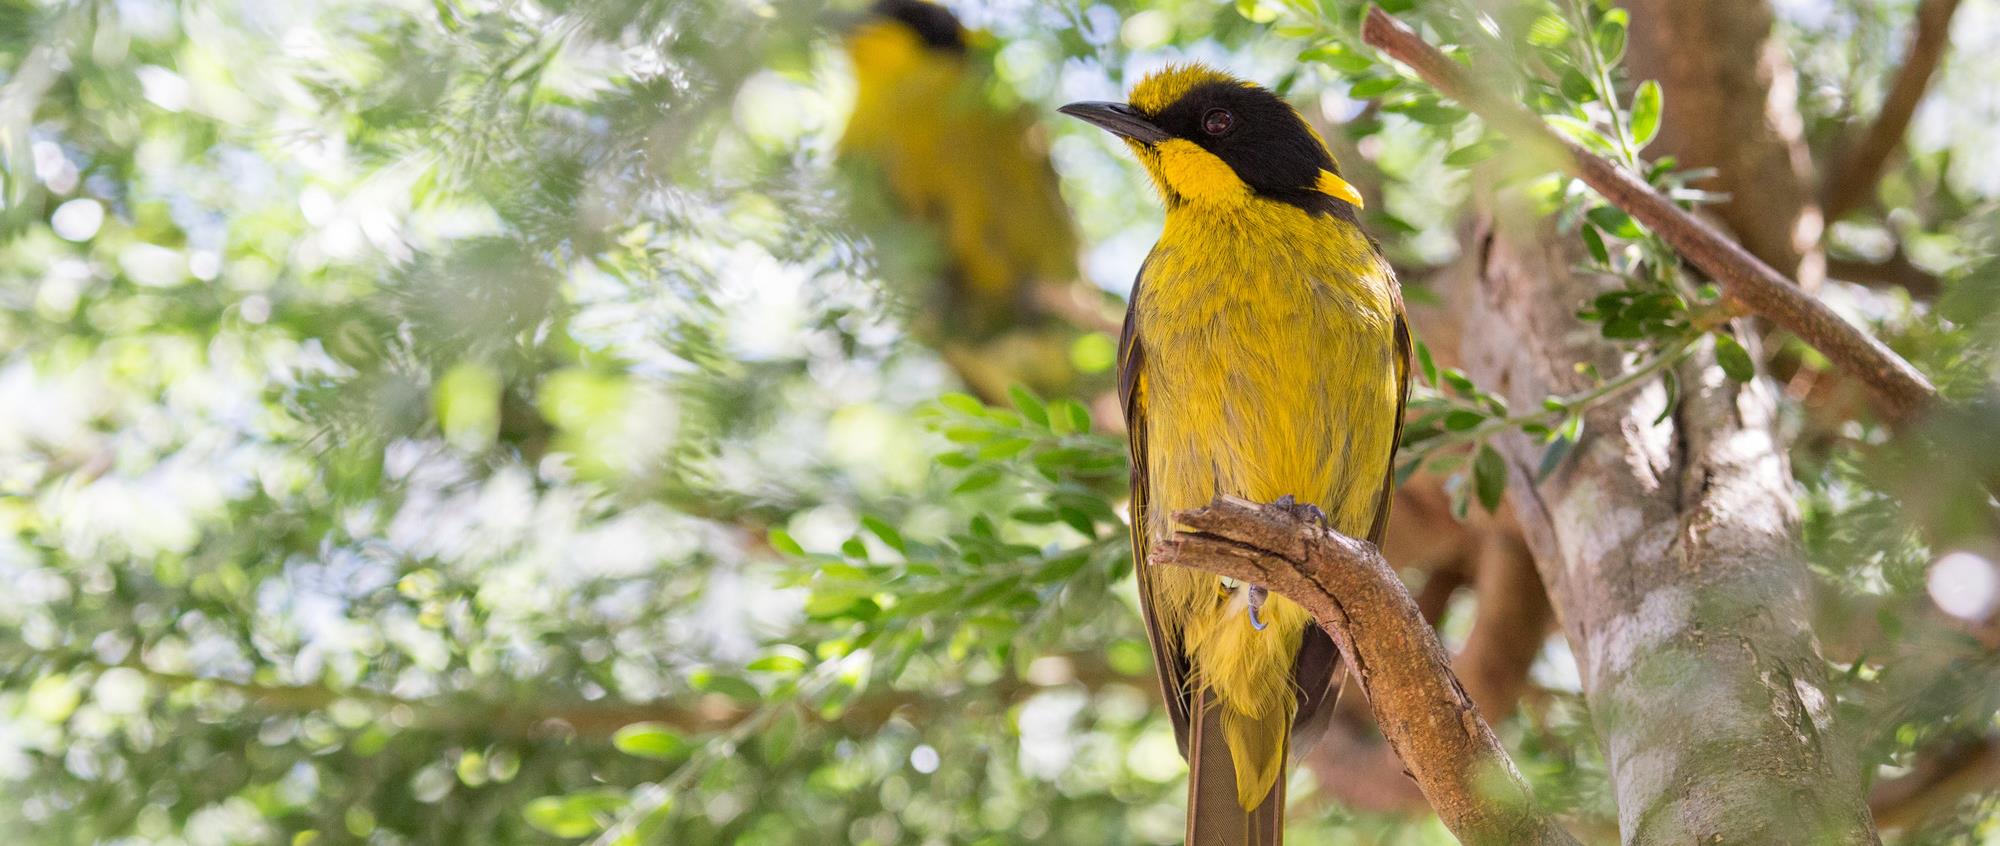 Two Helmeted Honey-eaters on a branch, with the Sun glistening through the leaves.